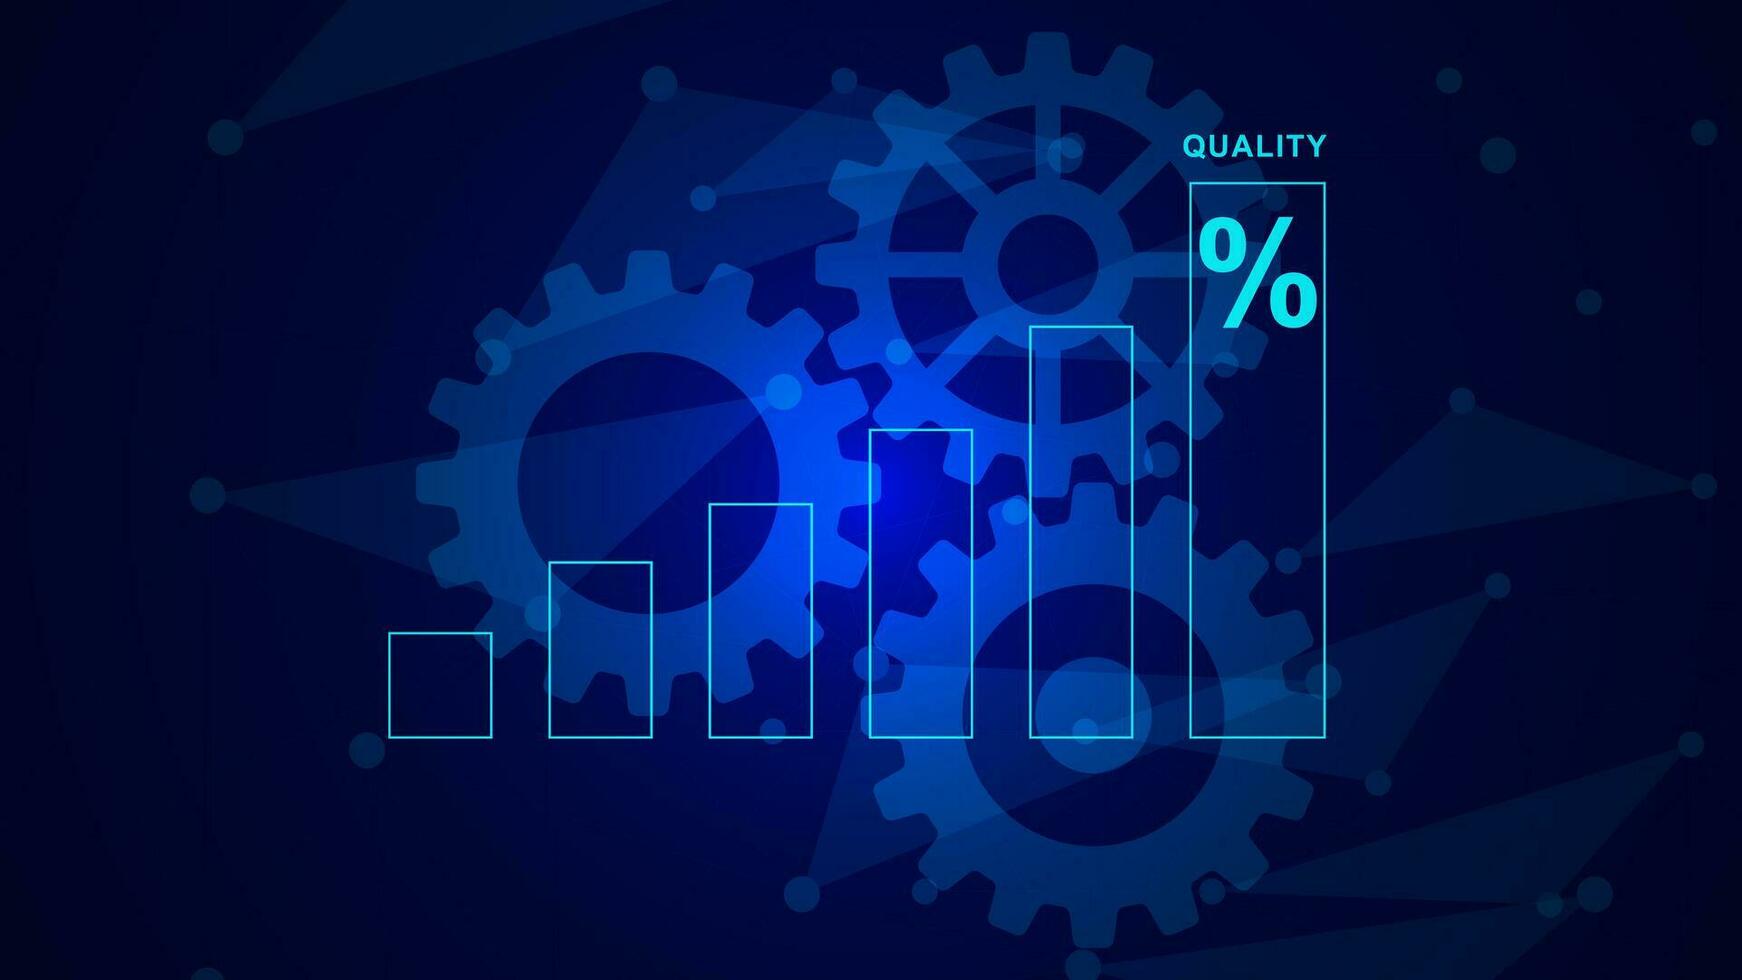 Quality control levels growth. Process to the maximum quality with graph and gear wheel. Business and service concept background. Vector illustration.